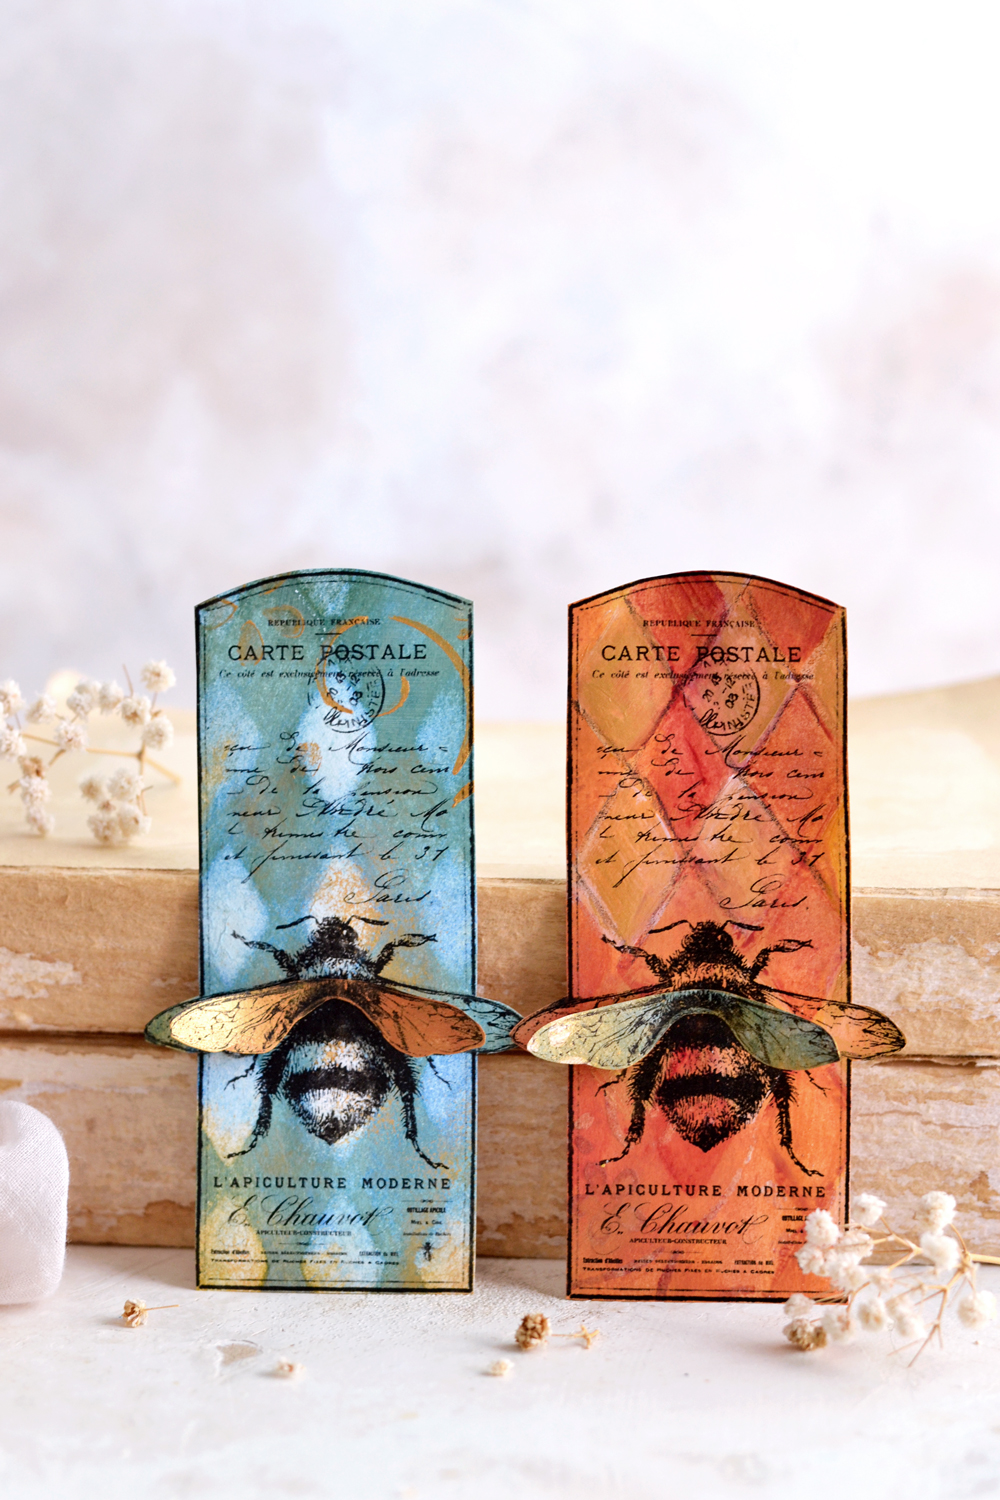 DIY 3D Vintage Bee Tag & how to paint on acrylic paint backgrounds #DIY #Vintage #frenchephemera #papercrafts #goldcrafts #bee #giftwrap #gifttags